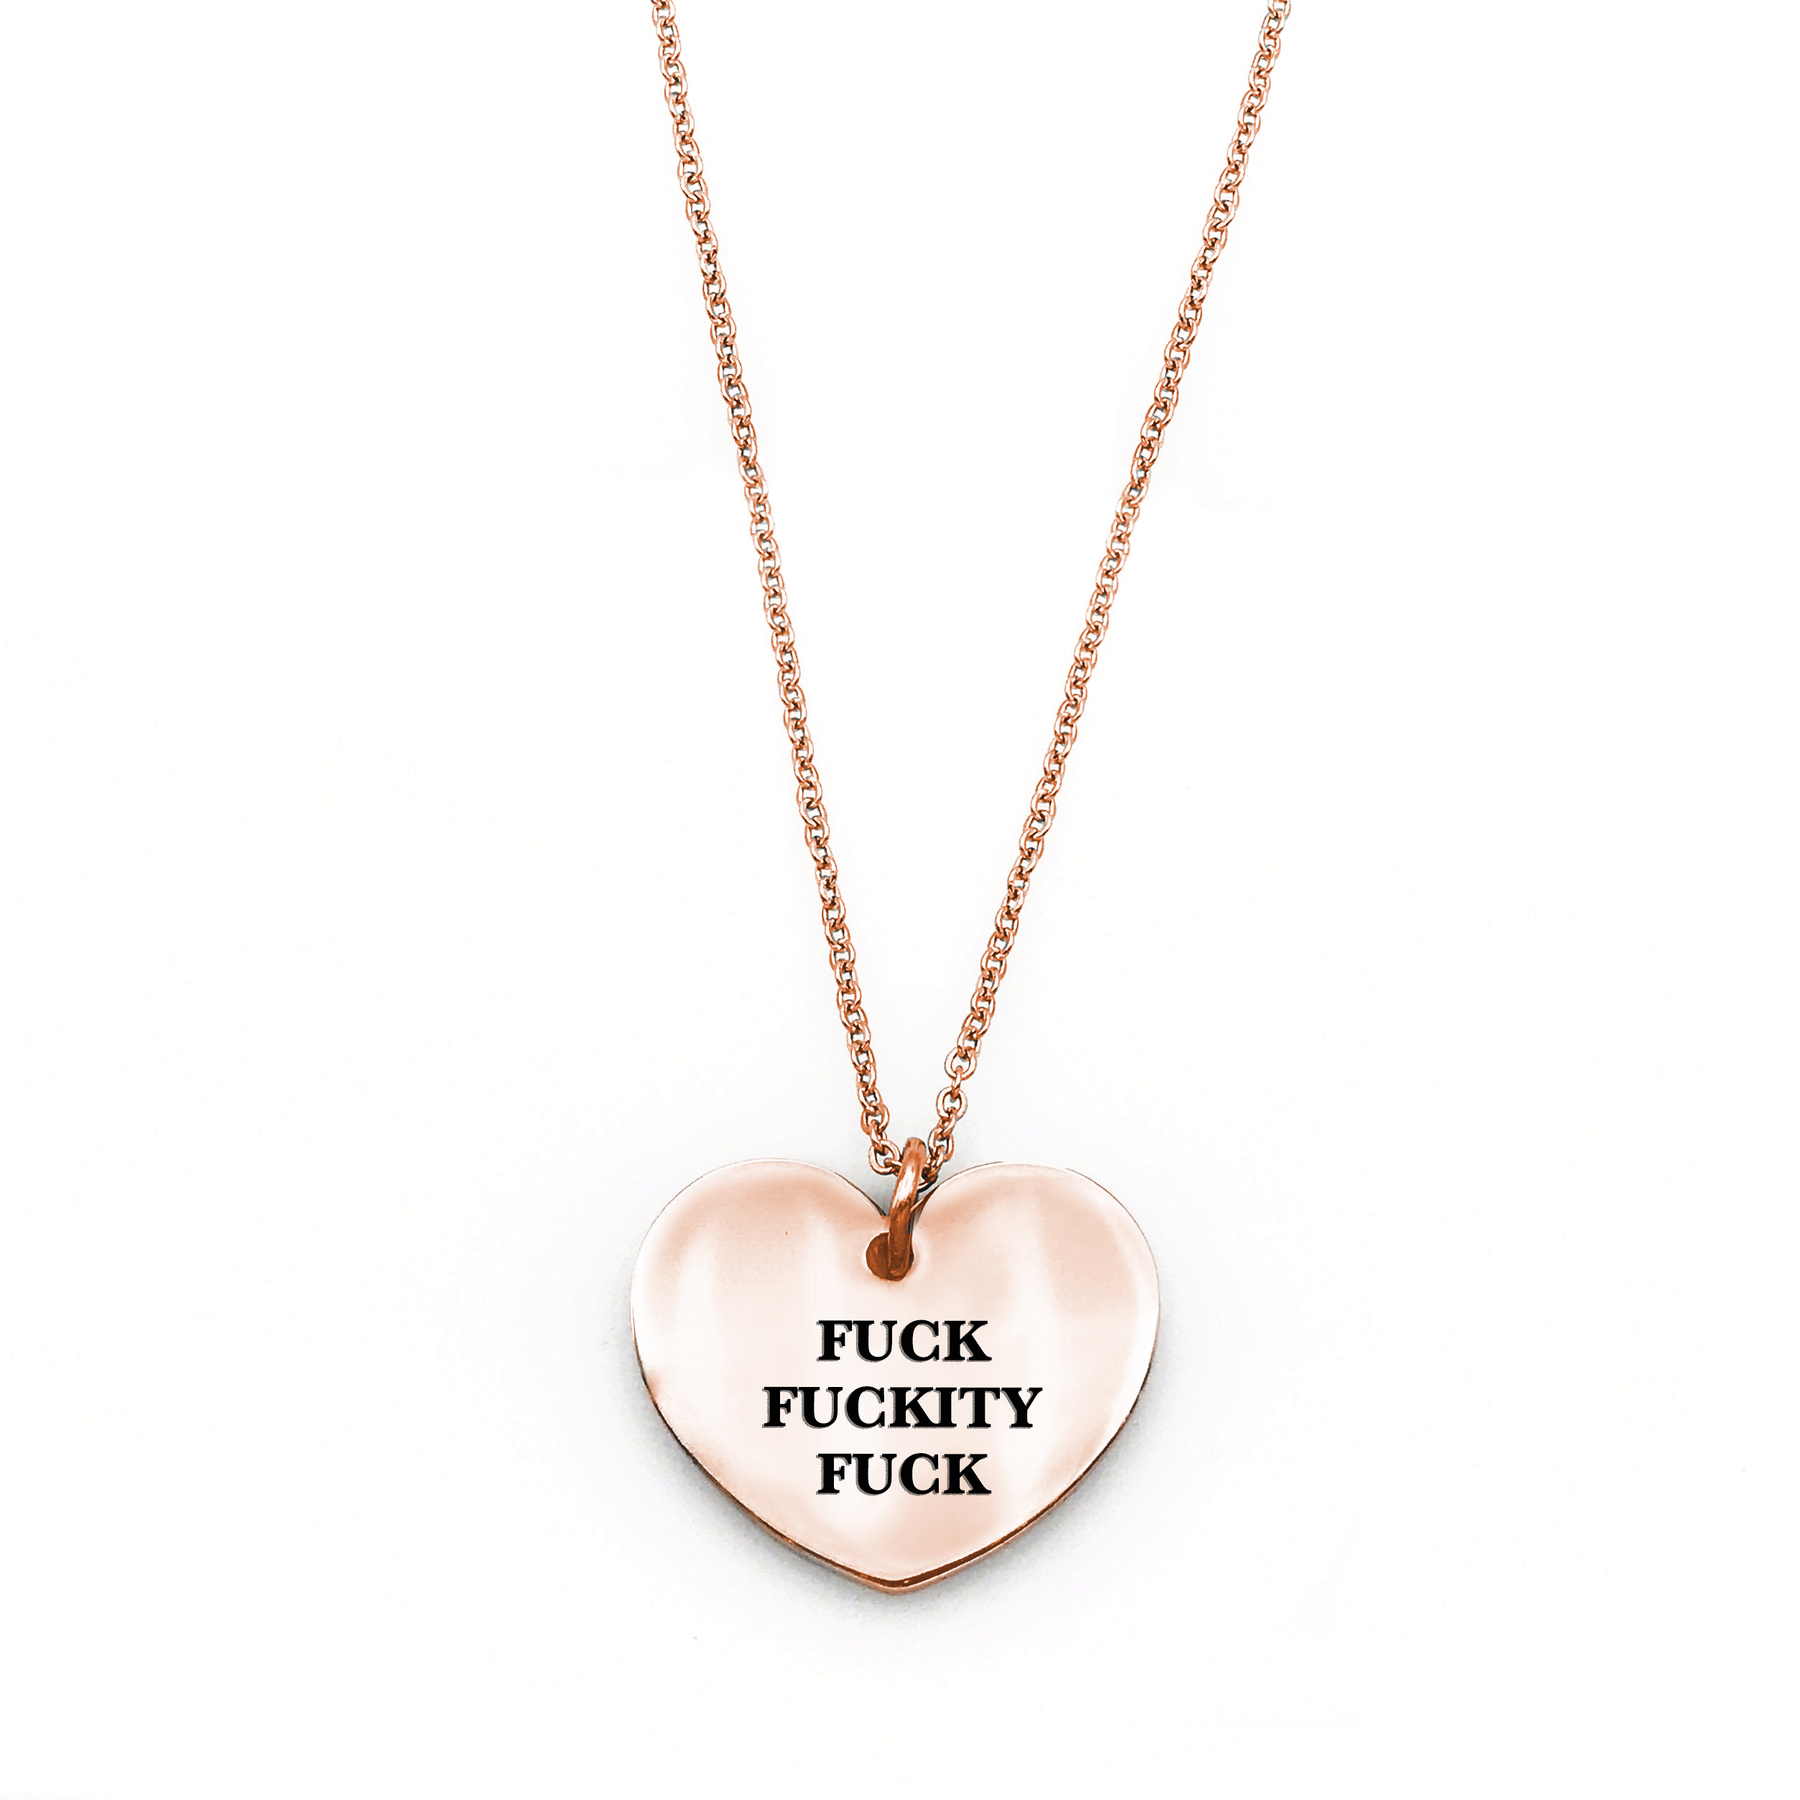 Fuck Fuckity Fuck Necklace– Metal Marvels